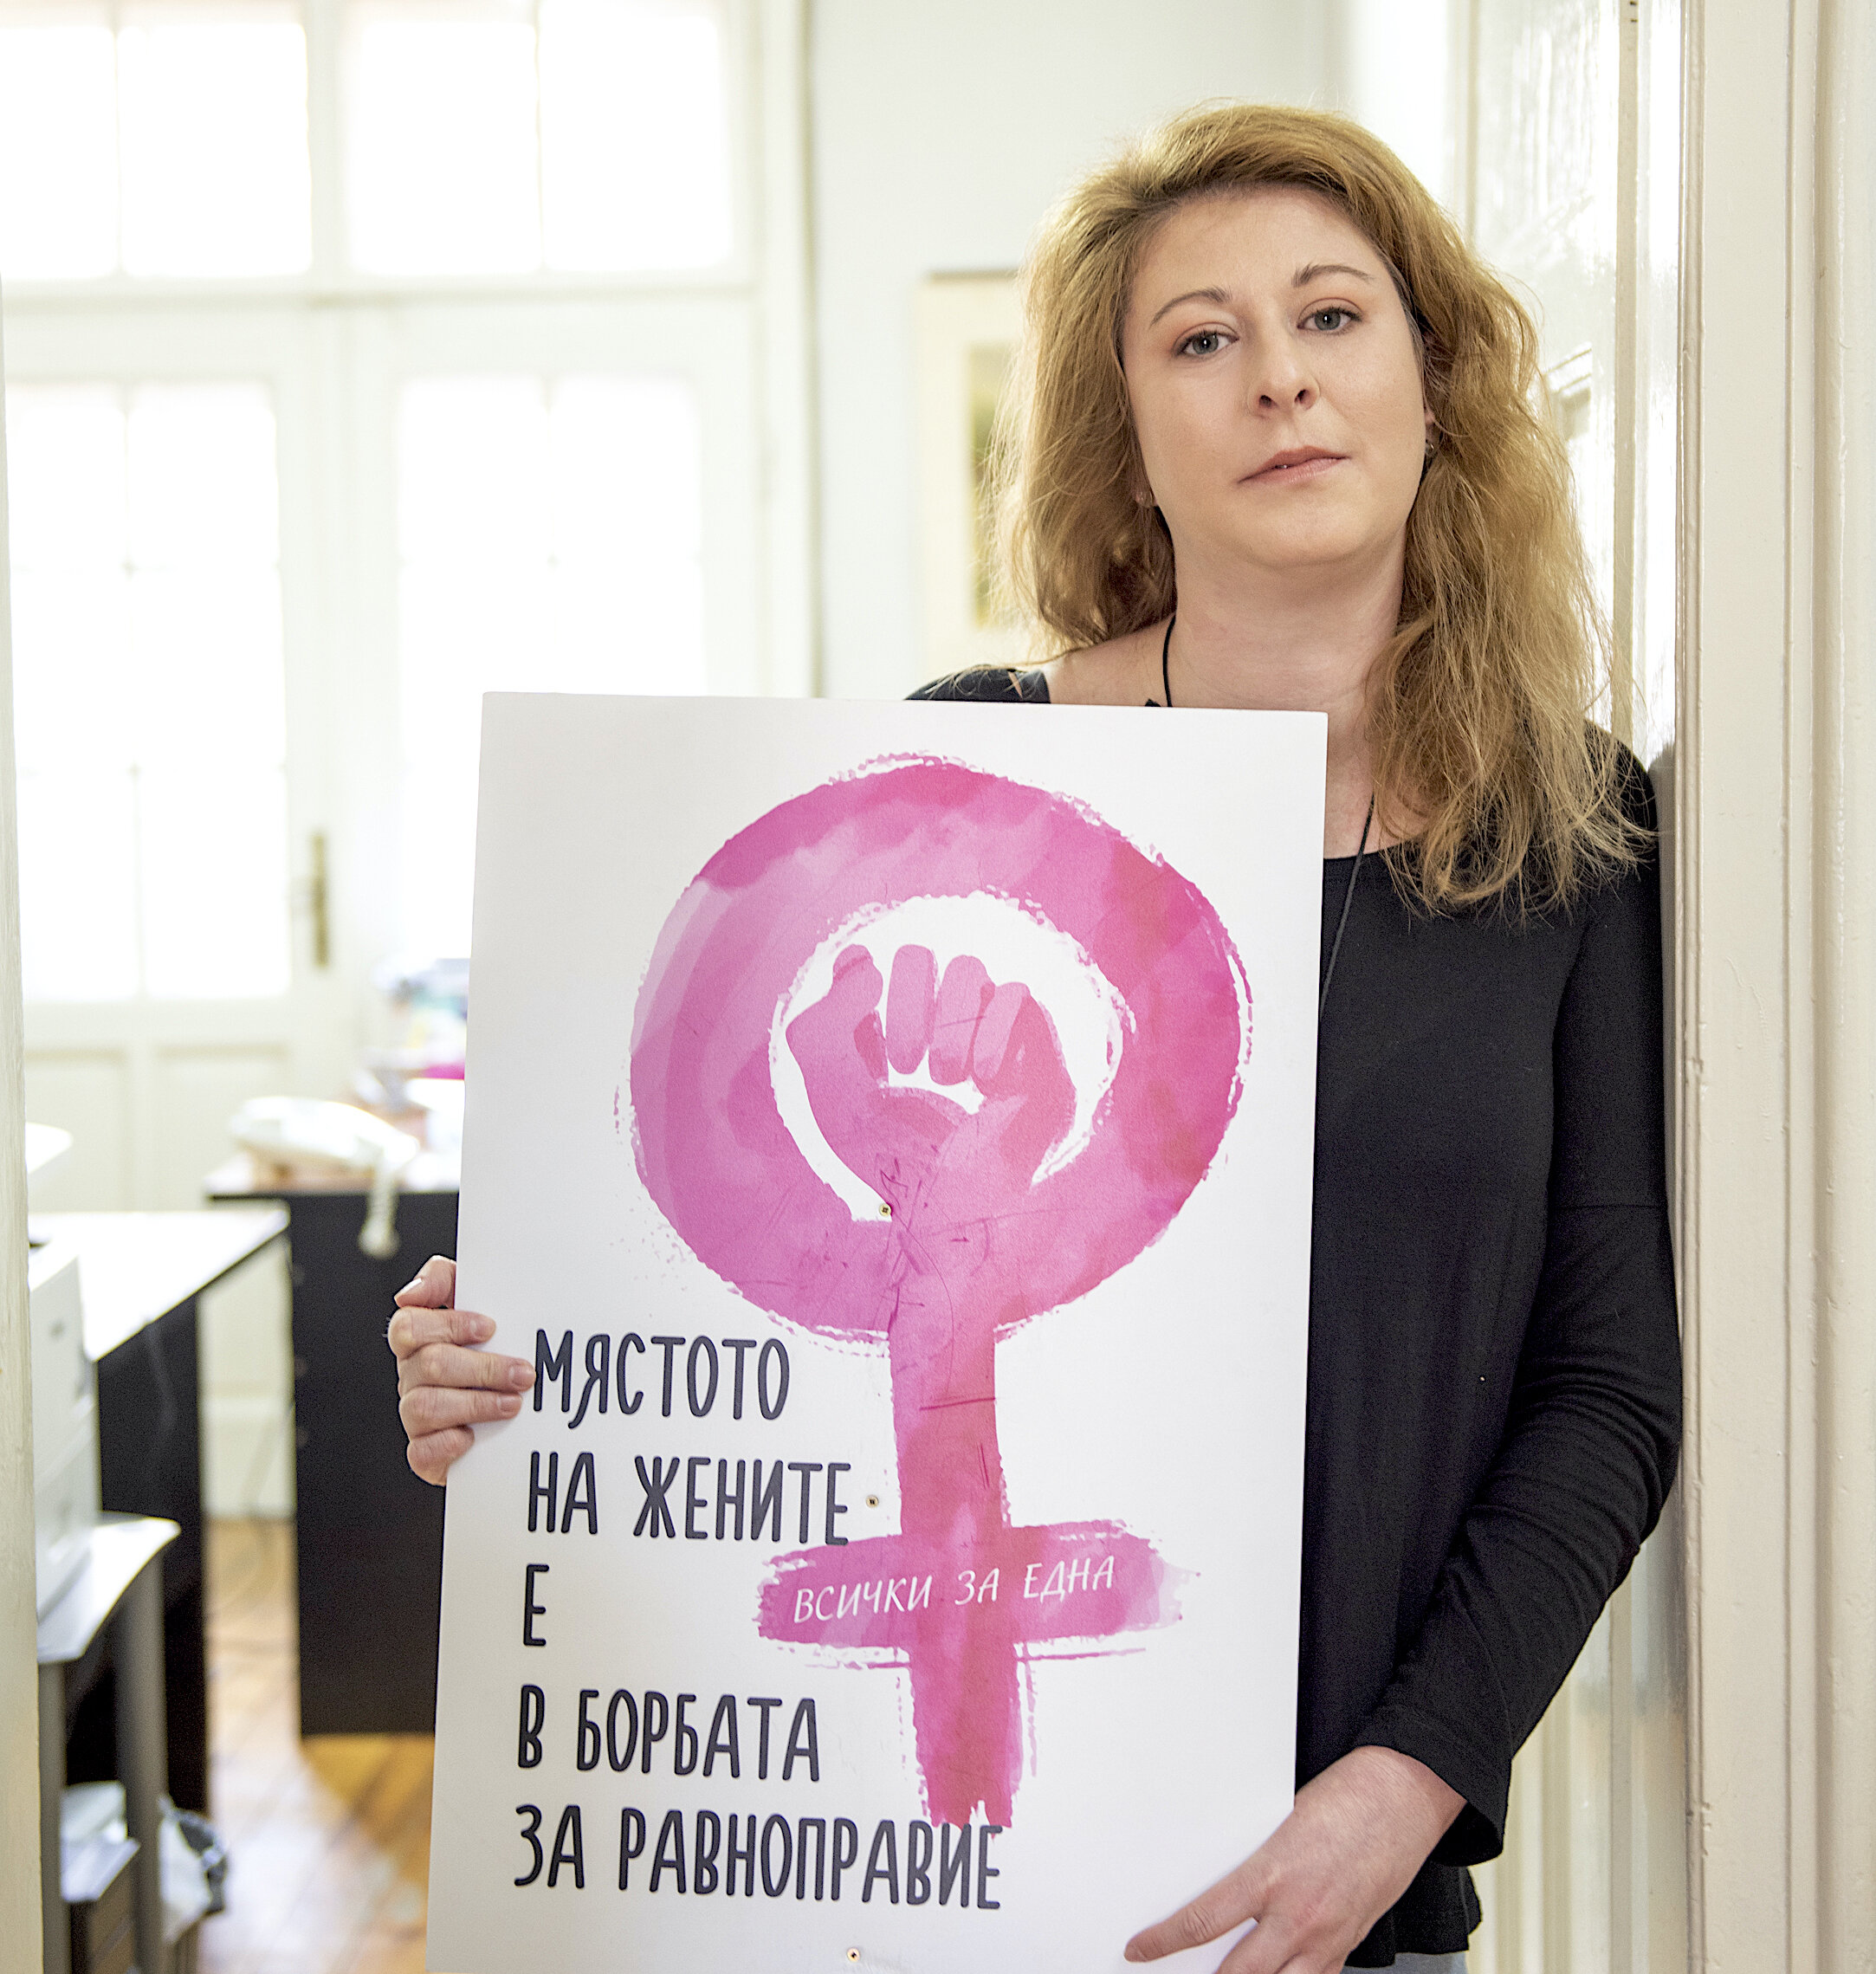 Nadejda Dermendjieva is a human rights activist and Executive Director of the Bulgarian Fund for Women, which supports activists, grass root groups and NGOs working to empower girls and women and achieve gender equality in all spheres of life.